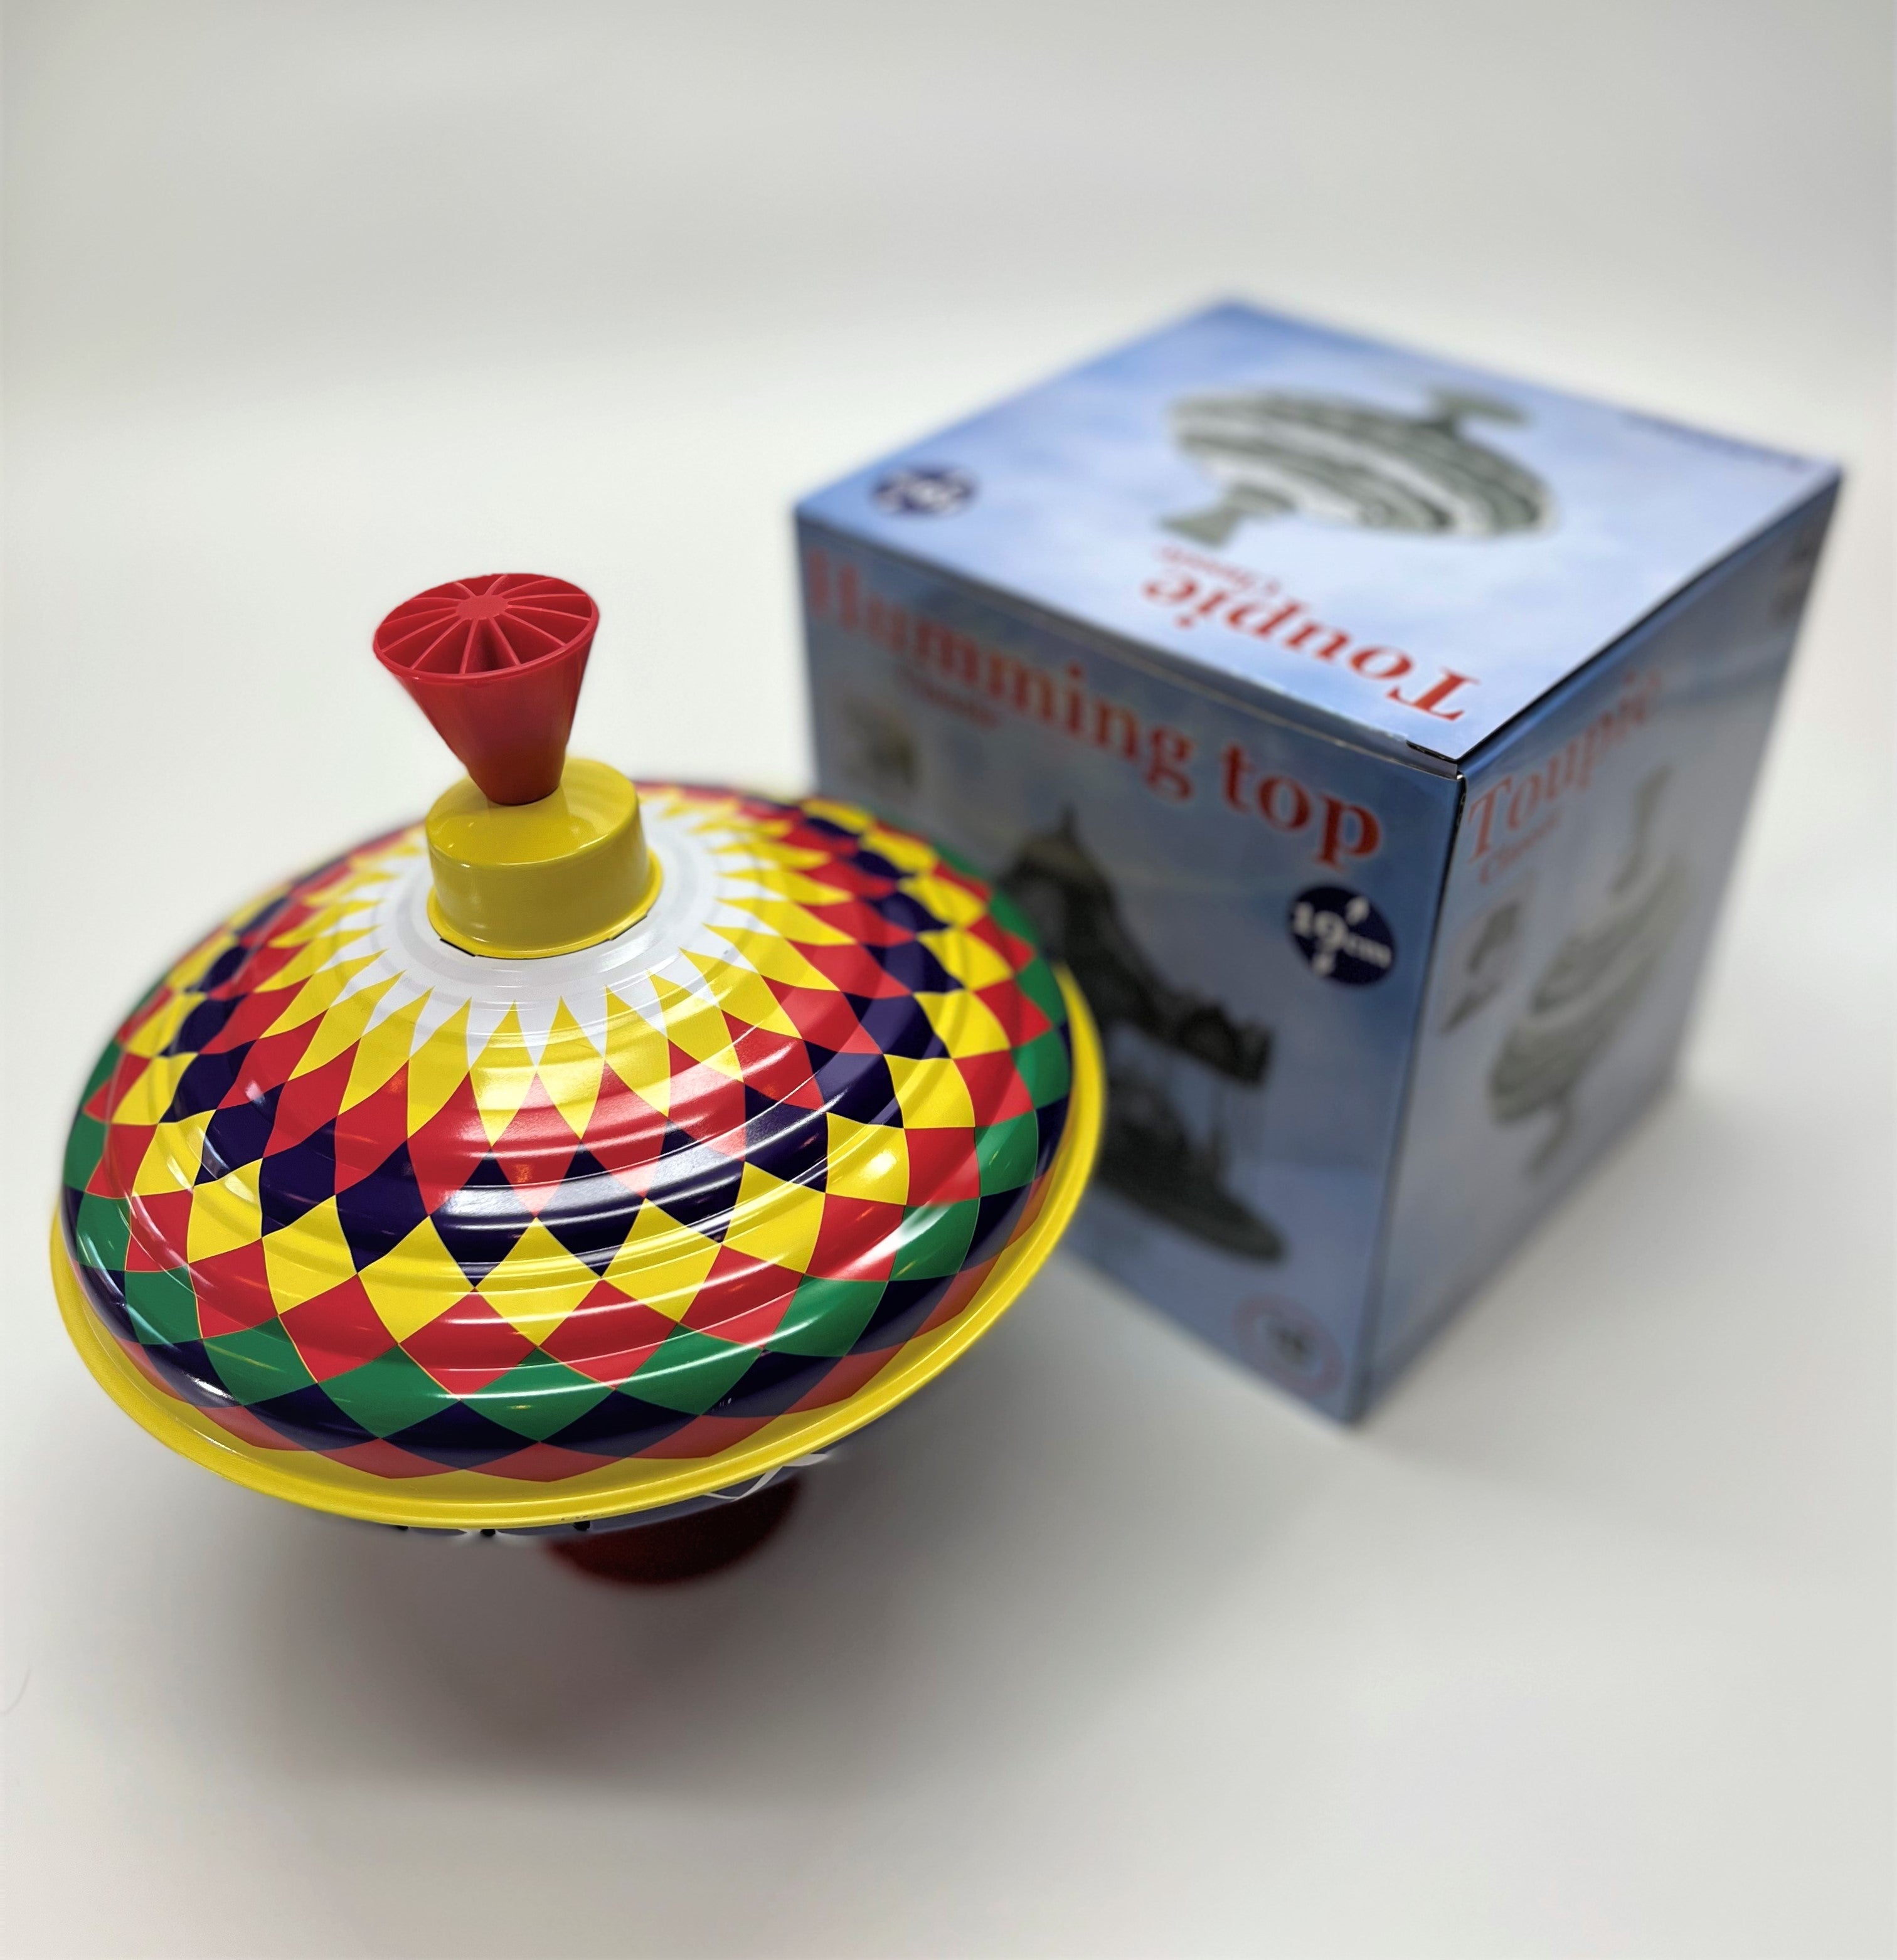 Classic Train Spinning Top Toy from KsmToys by Bolz. Real Action and Sounds  when the top spins. Durable 9.5 x 7.5 x 7.5 Ages 18 m+